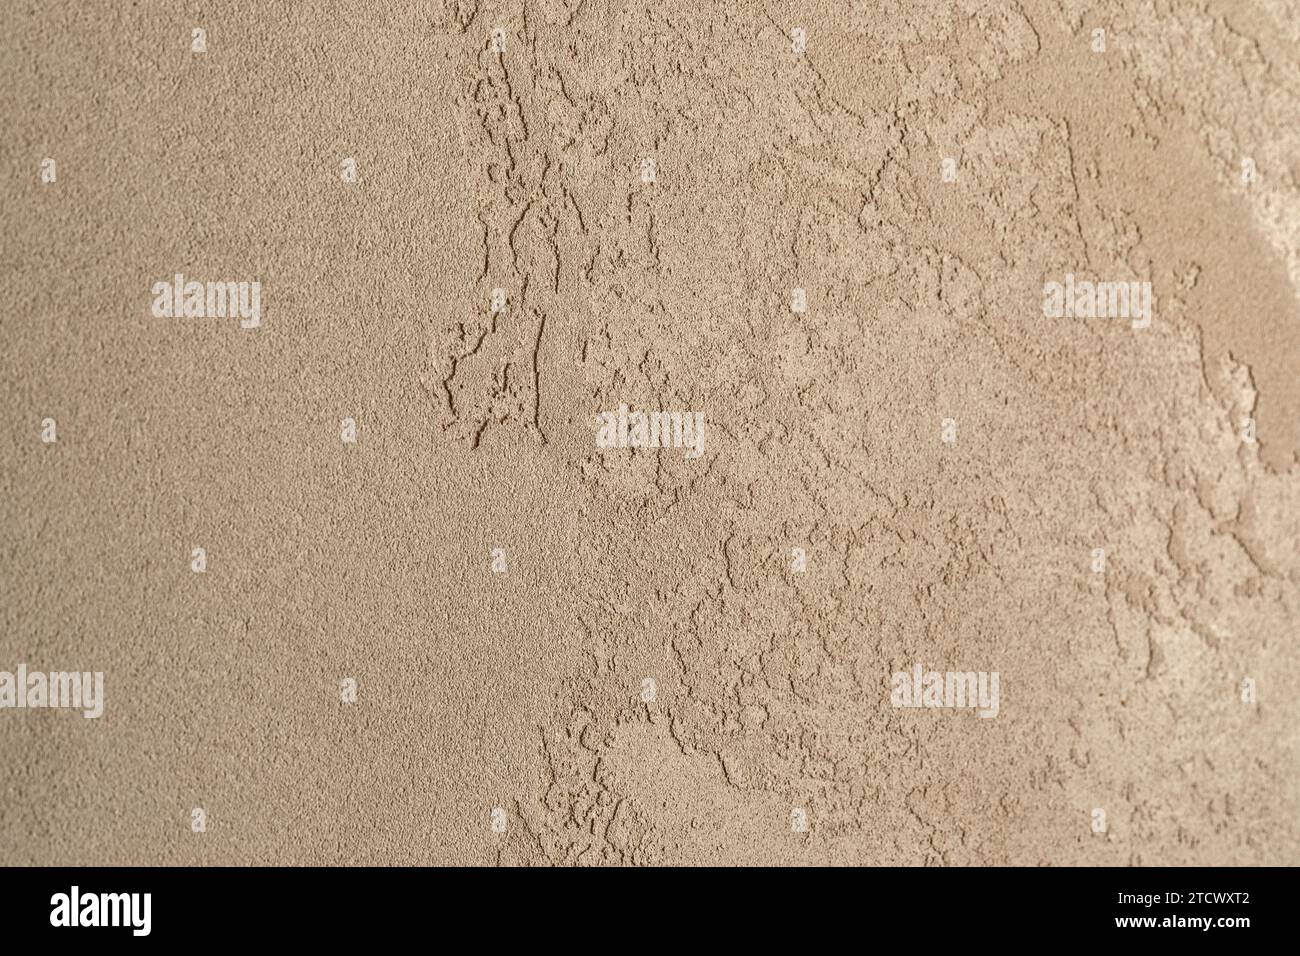 Clay wall close up with beautiful textures in earthy sandy shades. Wabi-sabi interior textures Stock Photo